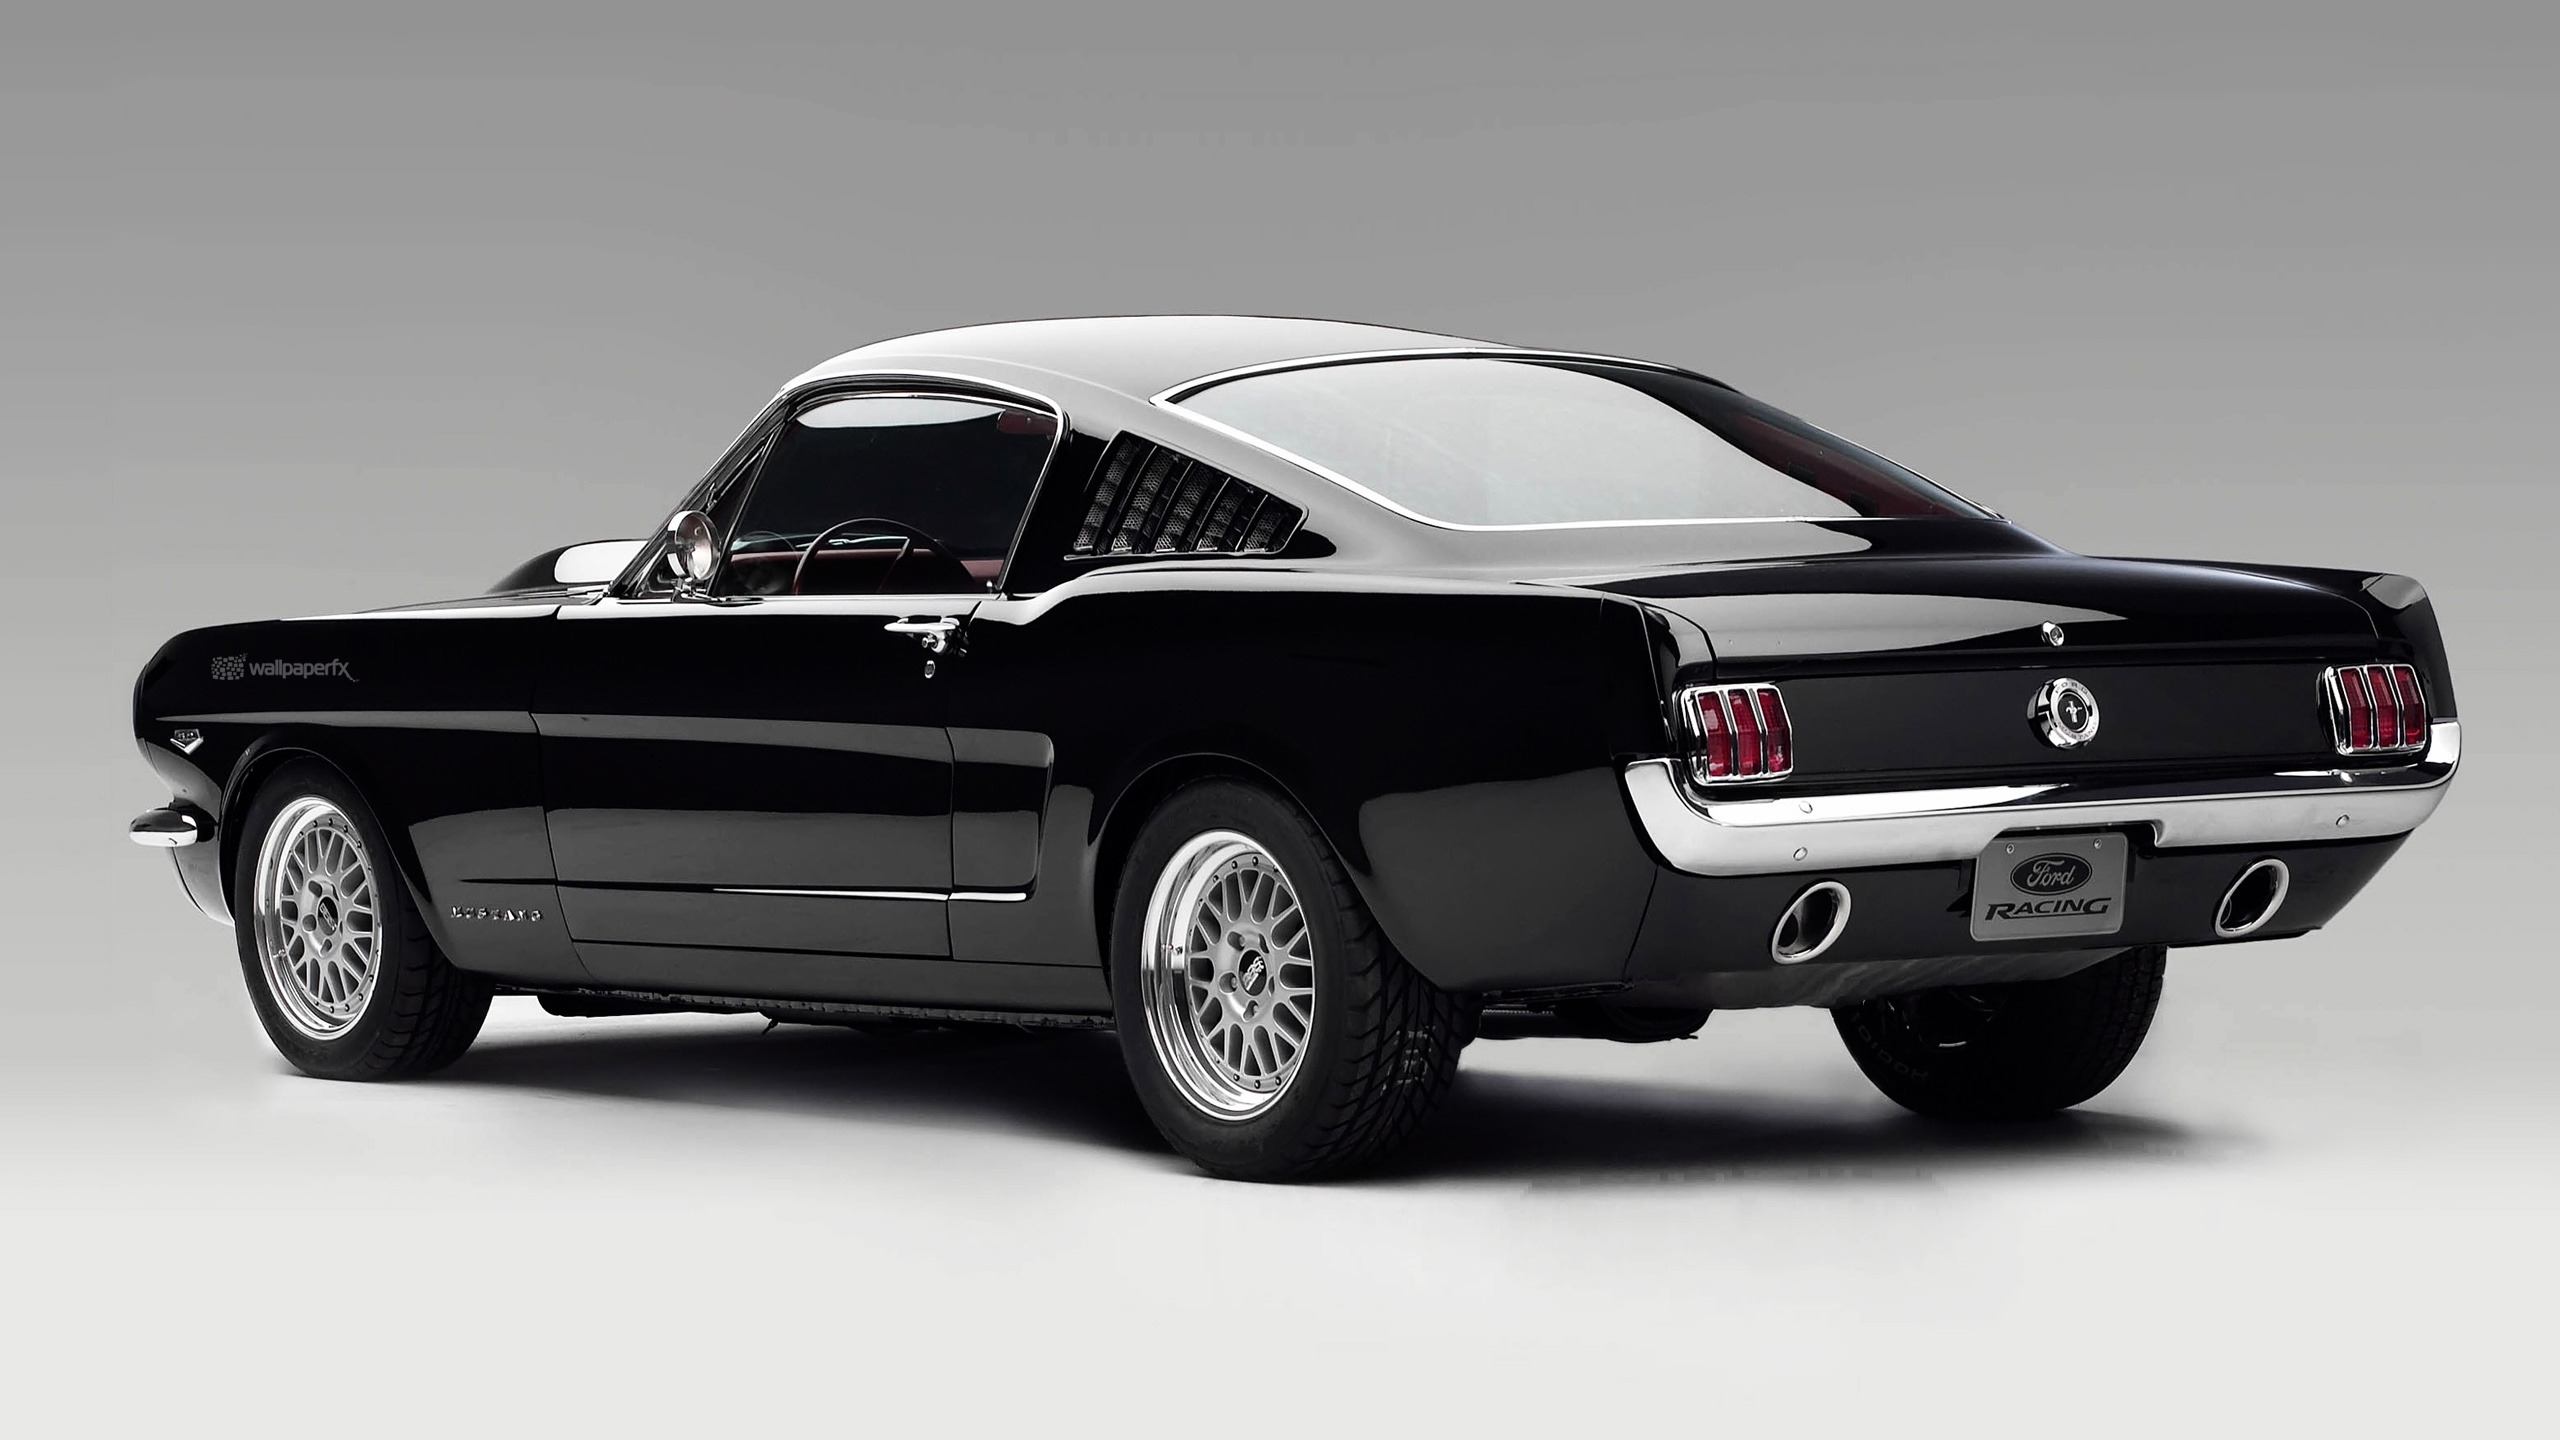 Ford Mustang Classic for 2560x1440 HDTV resolution